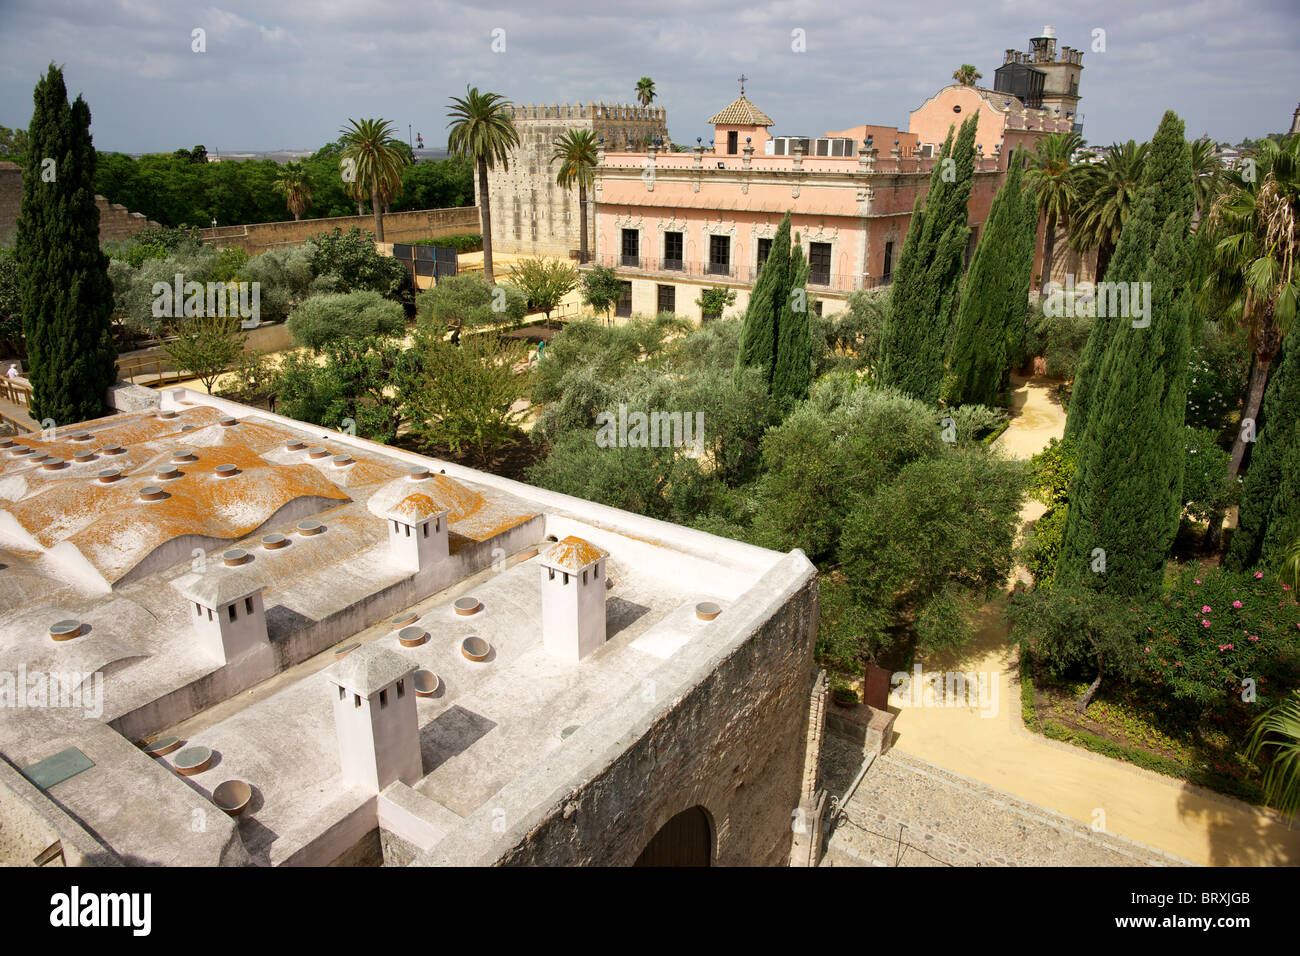 Alcazar gardens and buildings within the Moorish fortress. Stock Photo